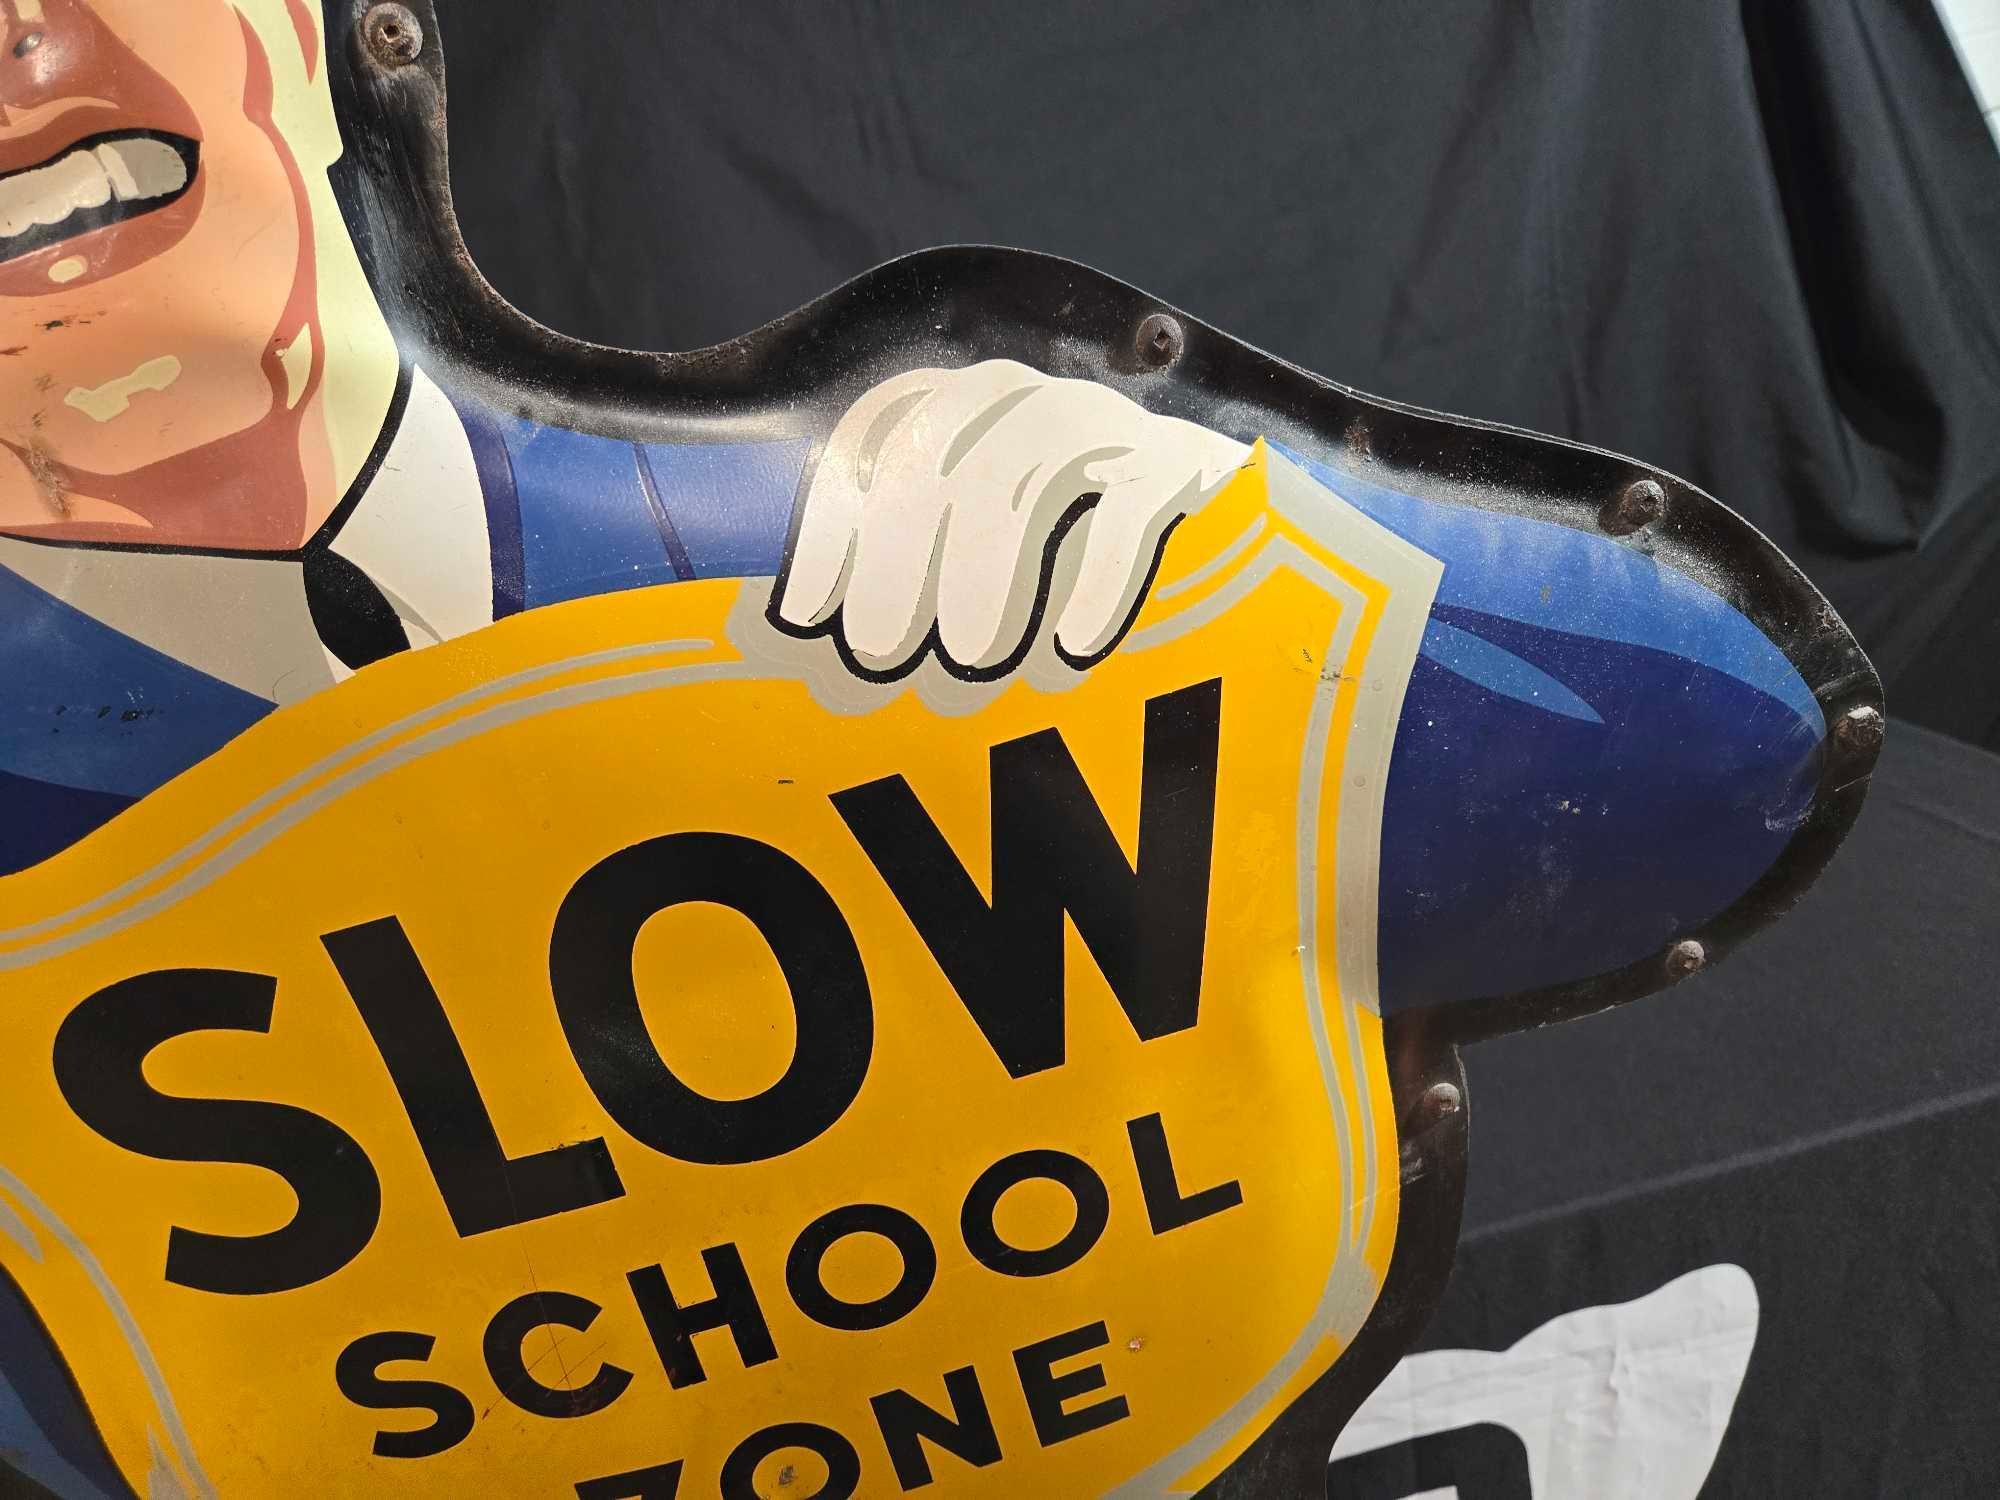 Coca Cola Double Sided Slow School Zone Sign w/ Heavy Cast Base